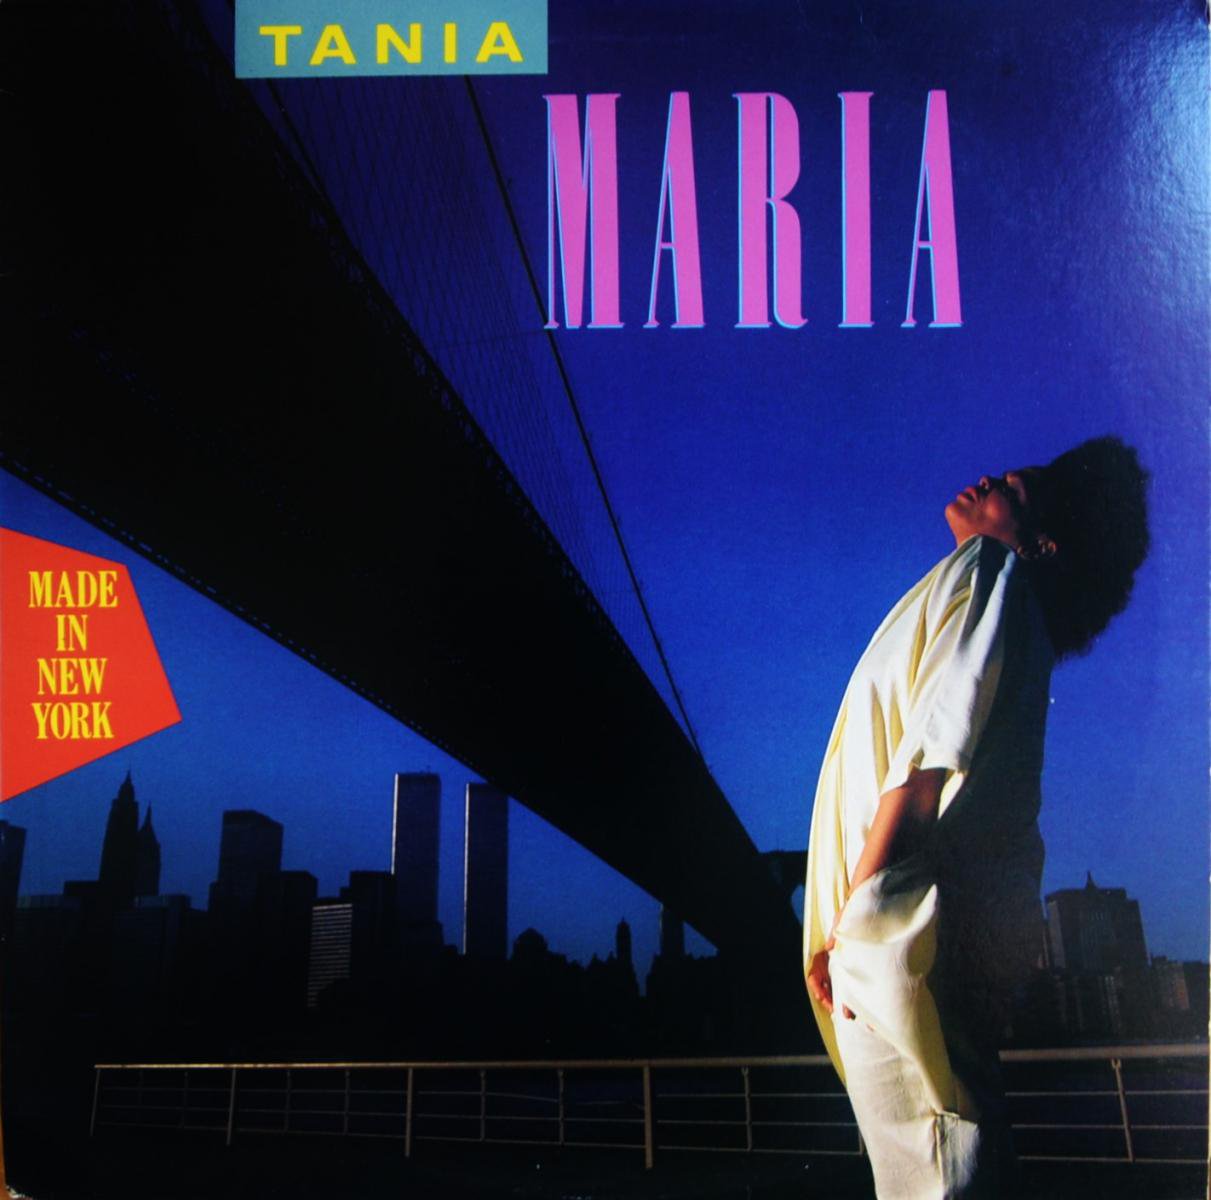 TANIA MARIA / MADE IN NEW YORK